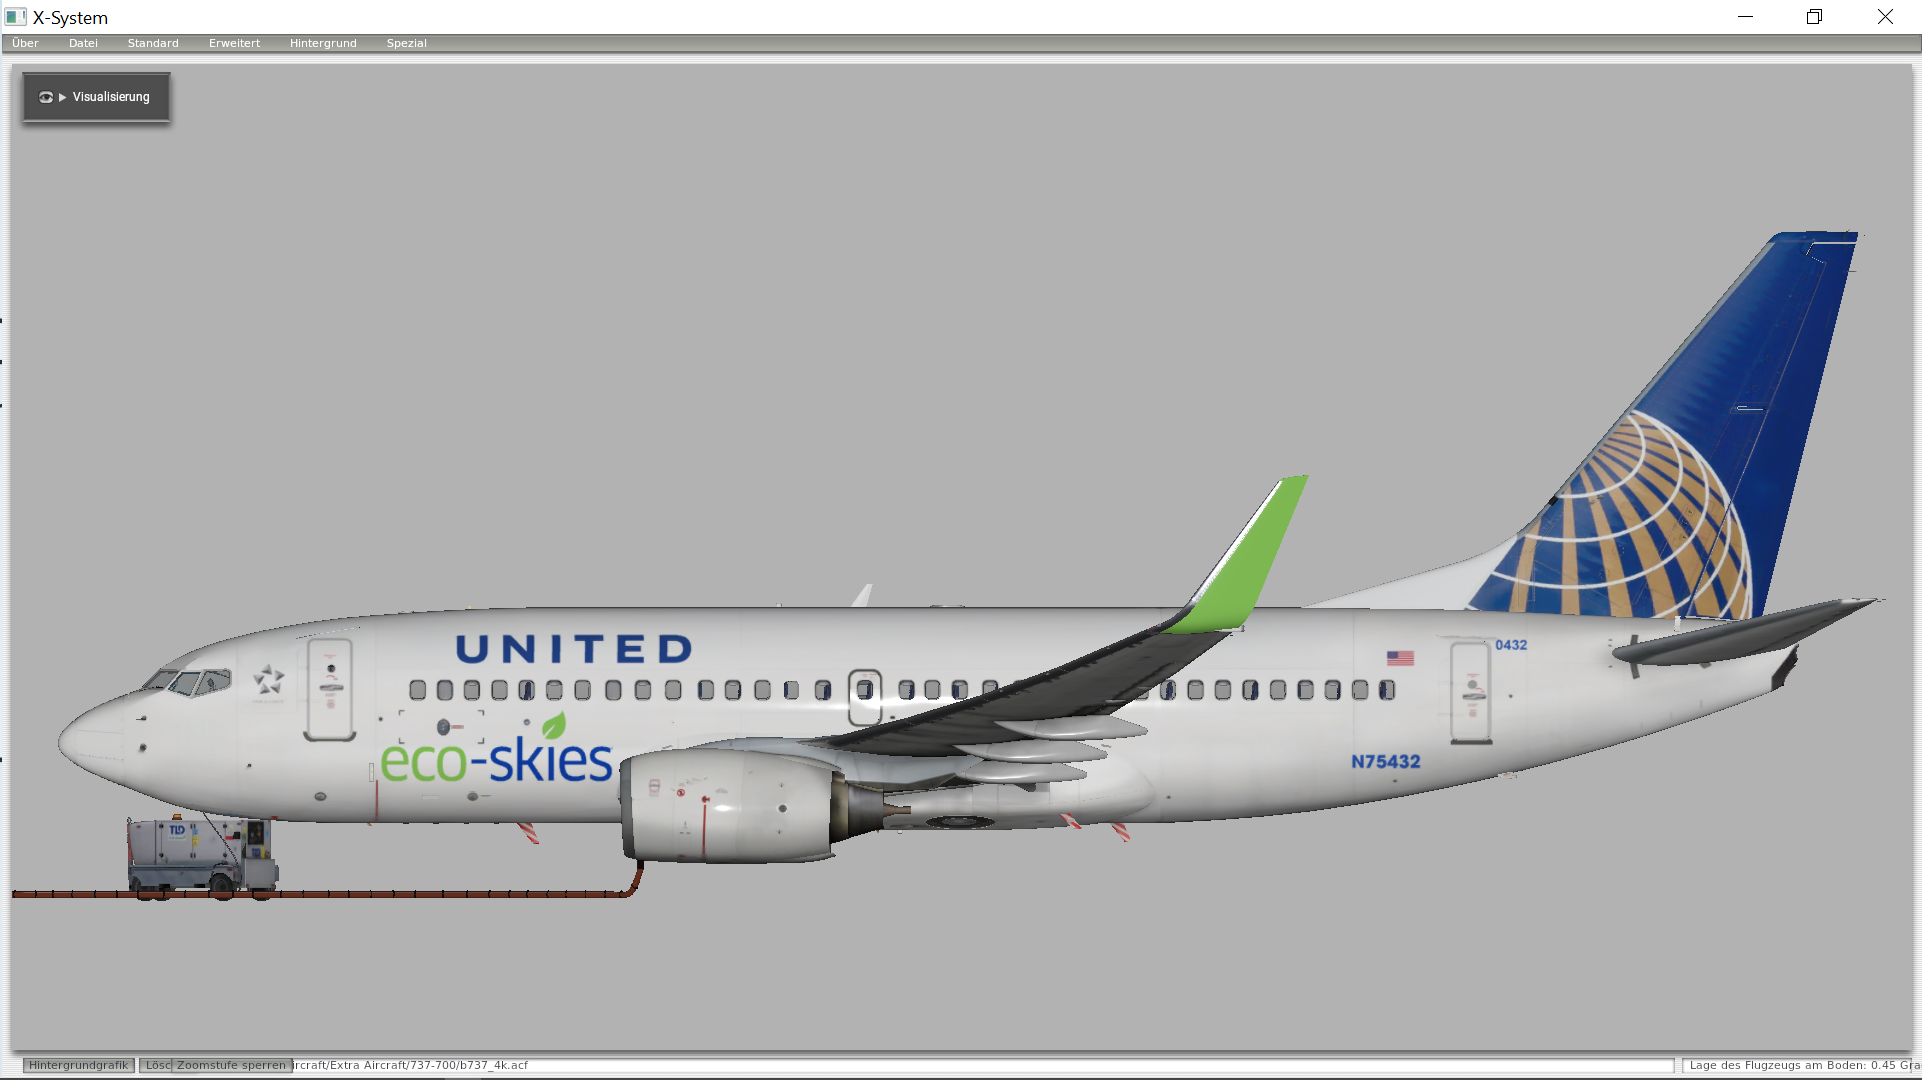 More information about "United Airlines - eco skies"